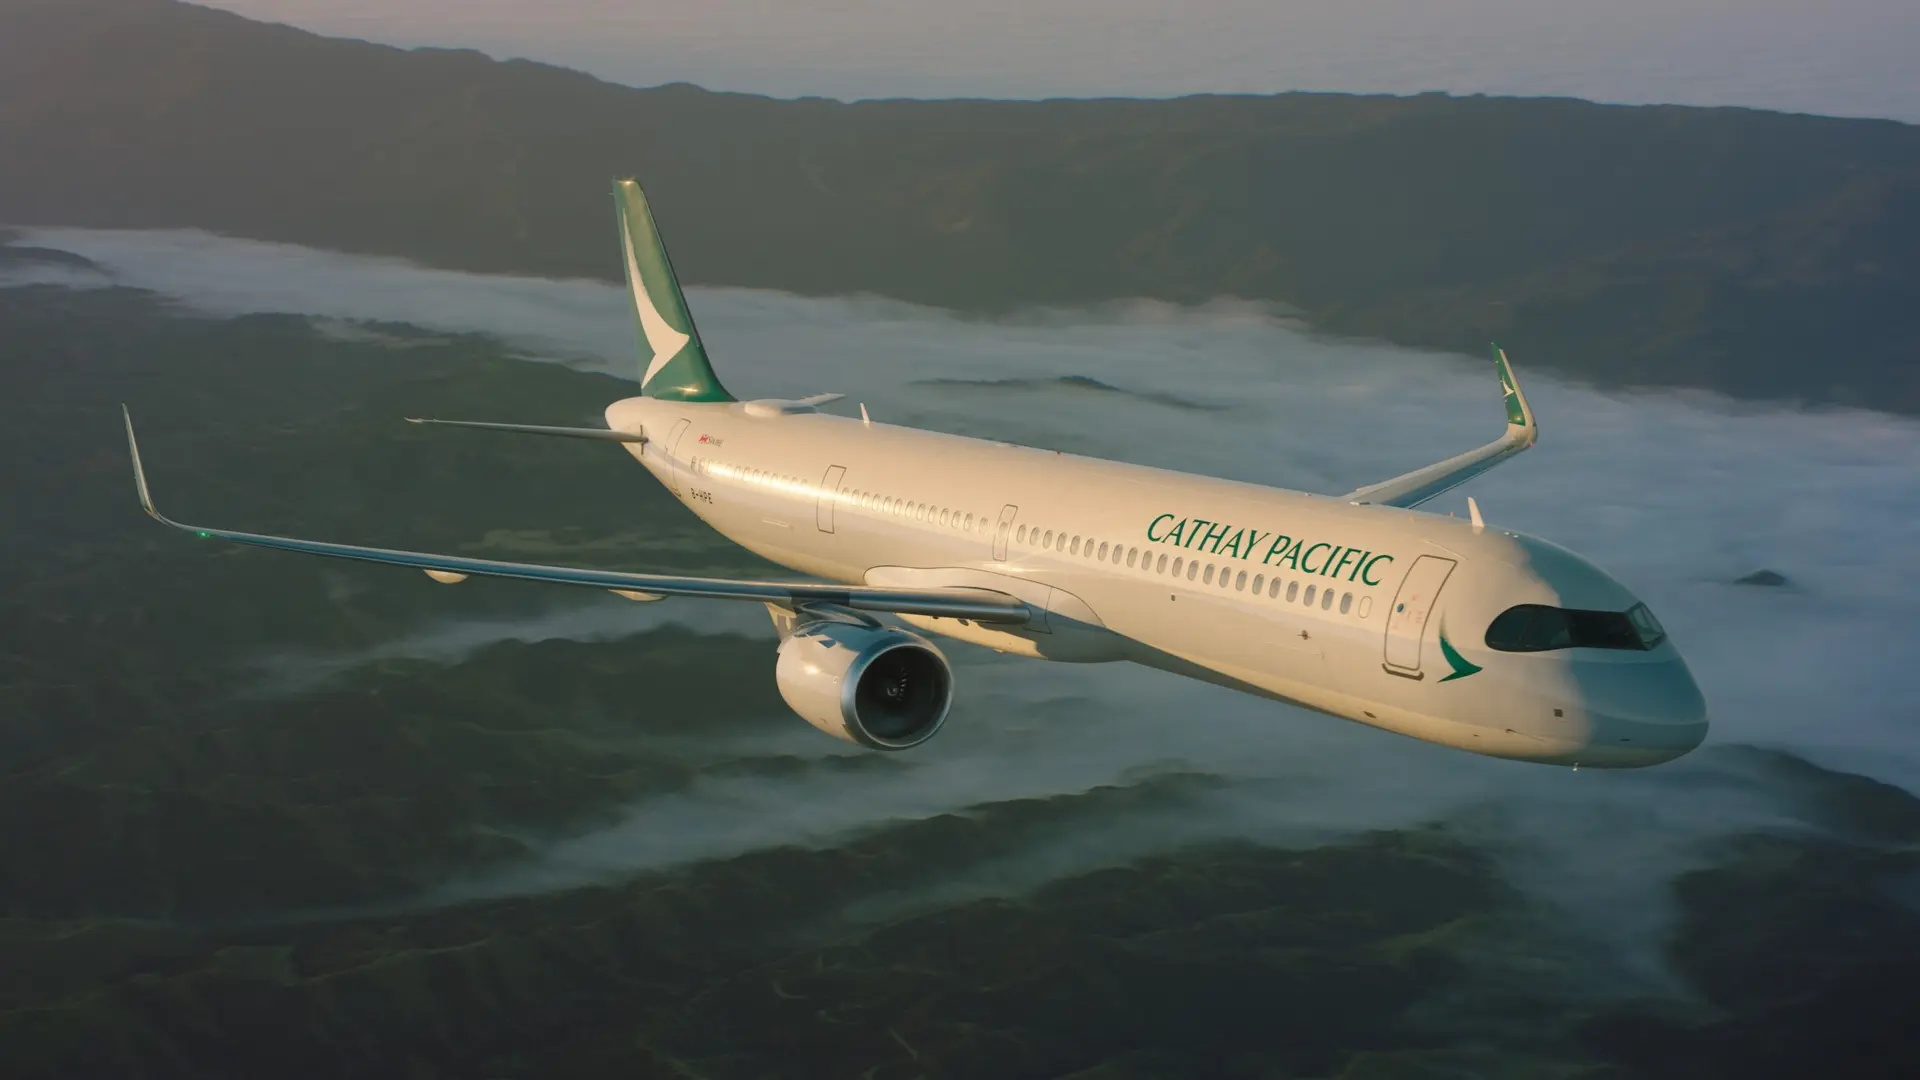 Airlines Articles - Cathay Pacific set to launch its first narrowbody aircraft service since 1983